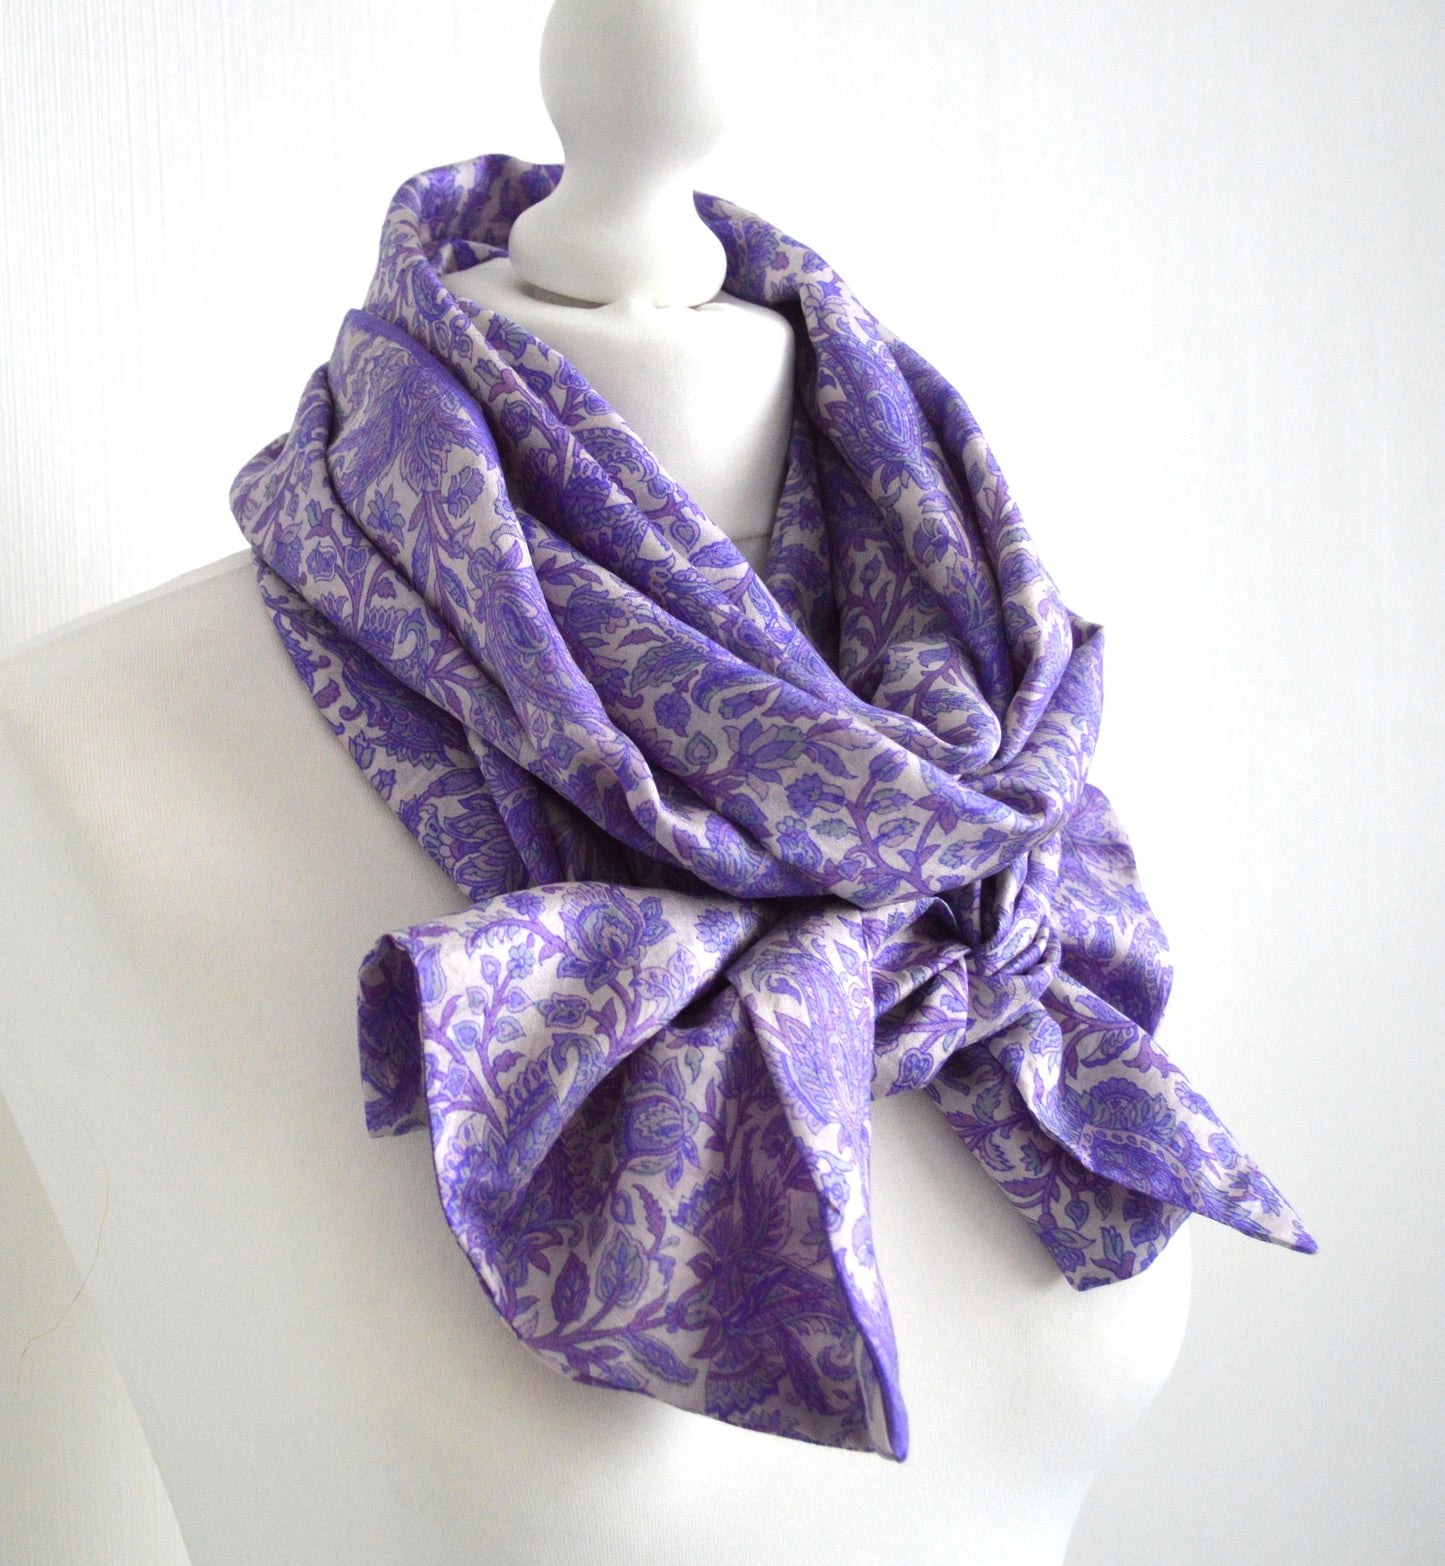 Lilac Floral Upcycled Vintage Sari Silk Scarf - Bohemian Lightweight Womens Scarves - Eco Friendly Christmad Gift For Her Mum Mom Gran